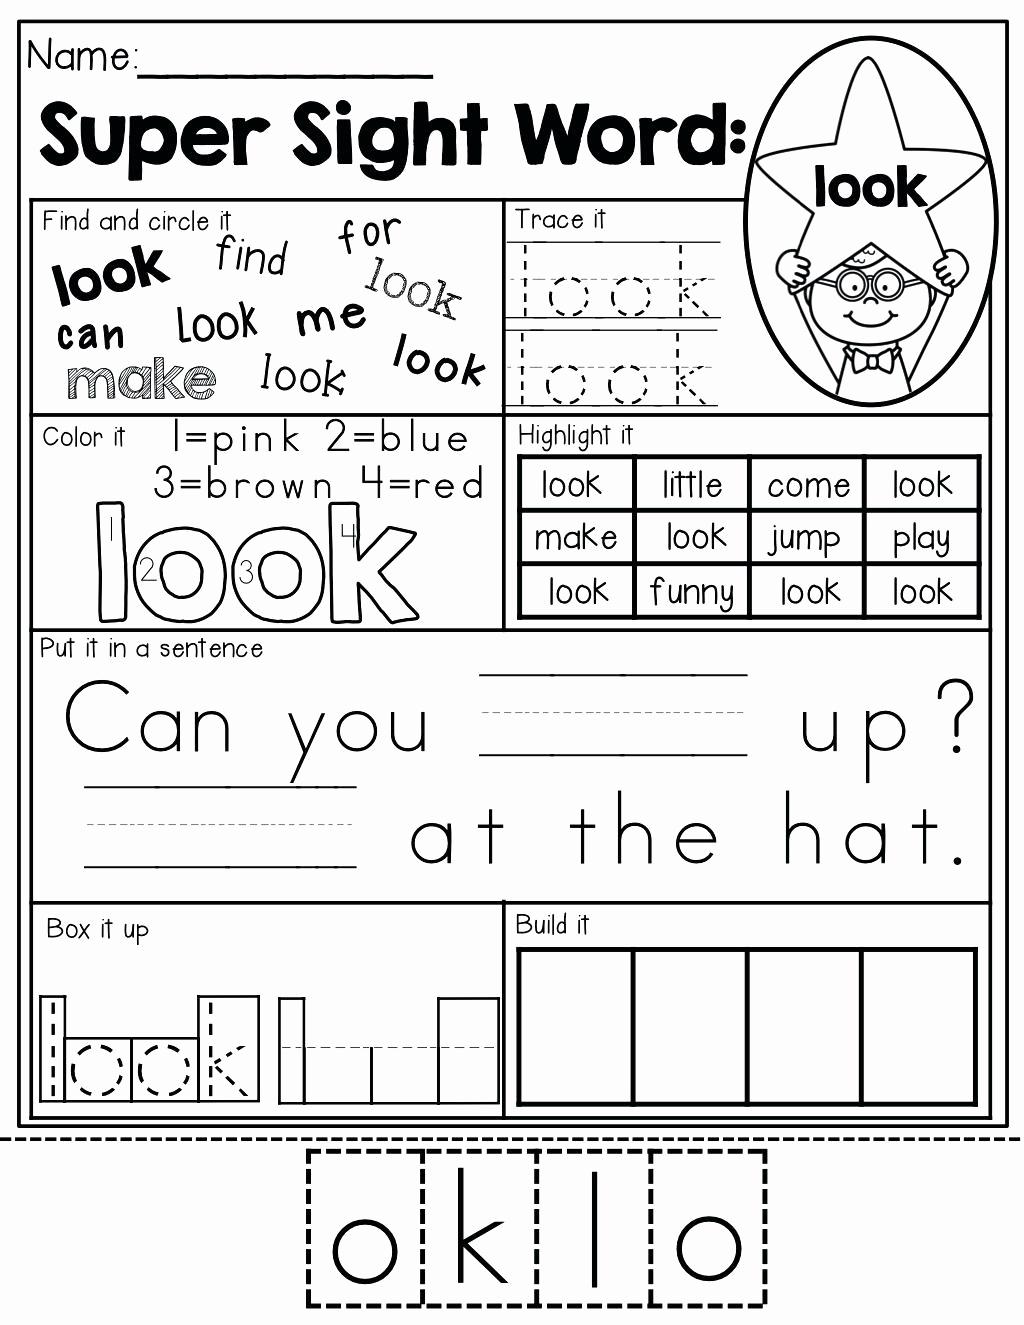 Vocabulary Worksheets for 1st Graders Beautiful Counting Money Worksheets 1st Grade 2